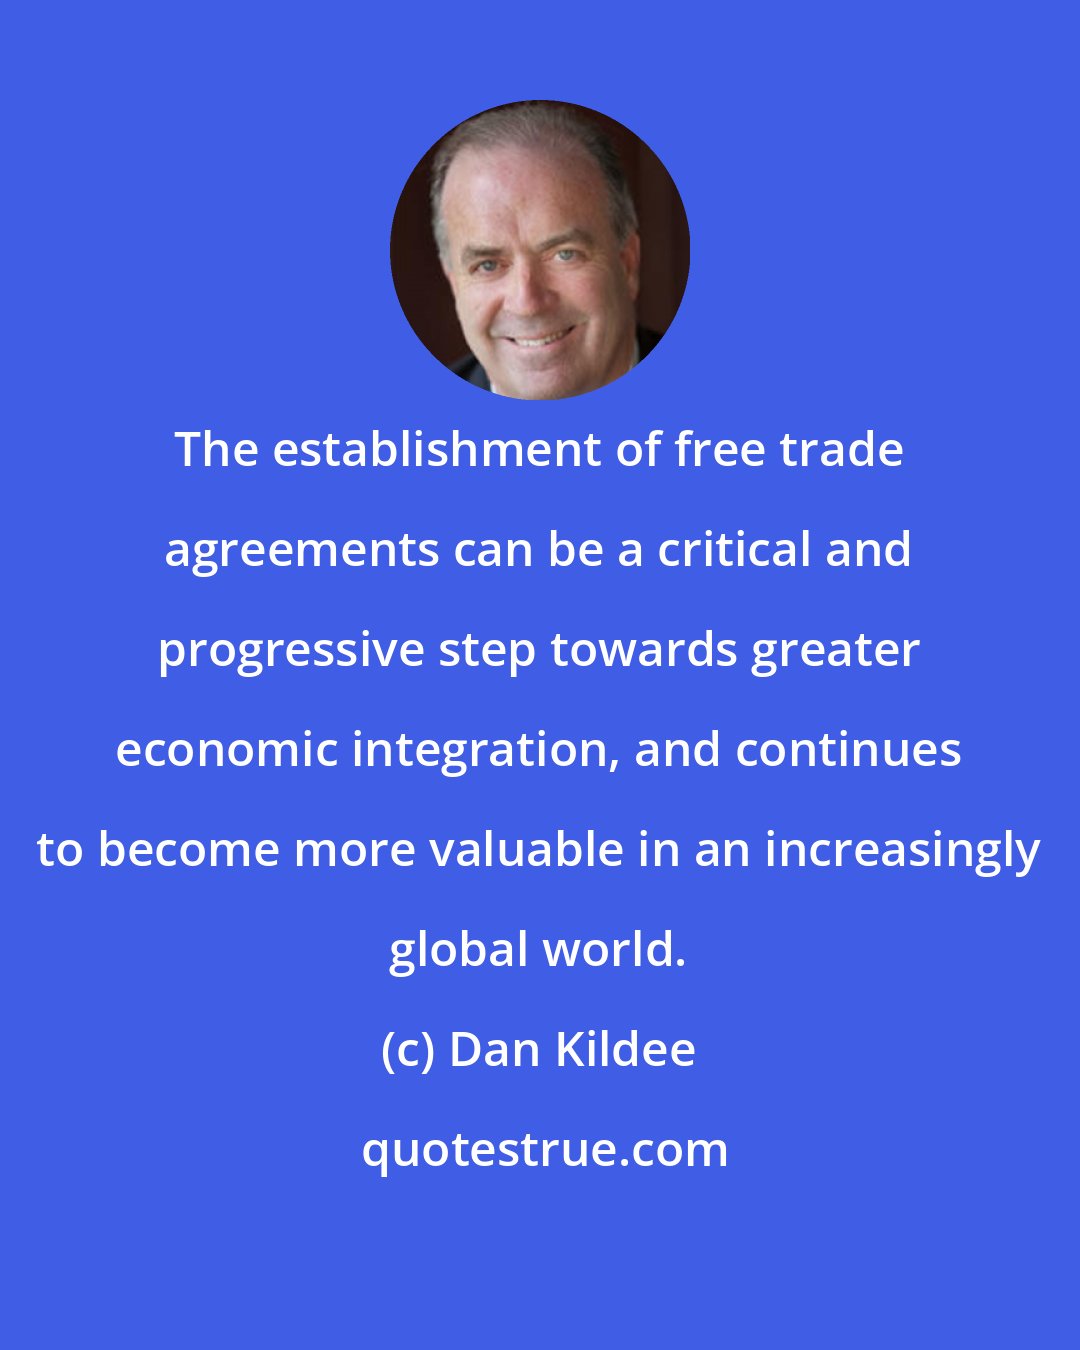 Dan Kildee: The establishment of free trade agreements can be a critical and progressive step towards greater economic integration, and continues to become more valuable in an increasingly global world.